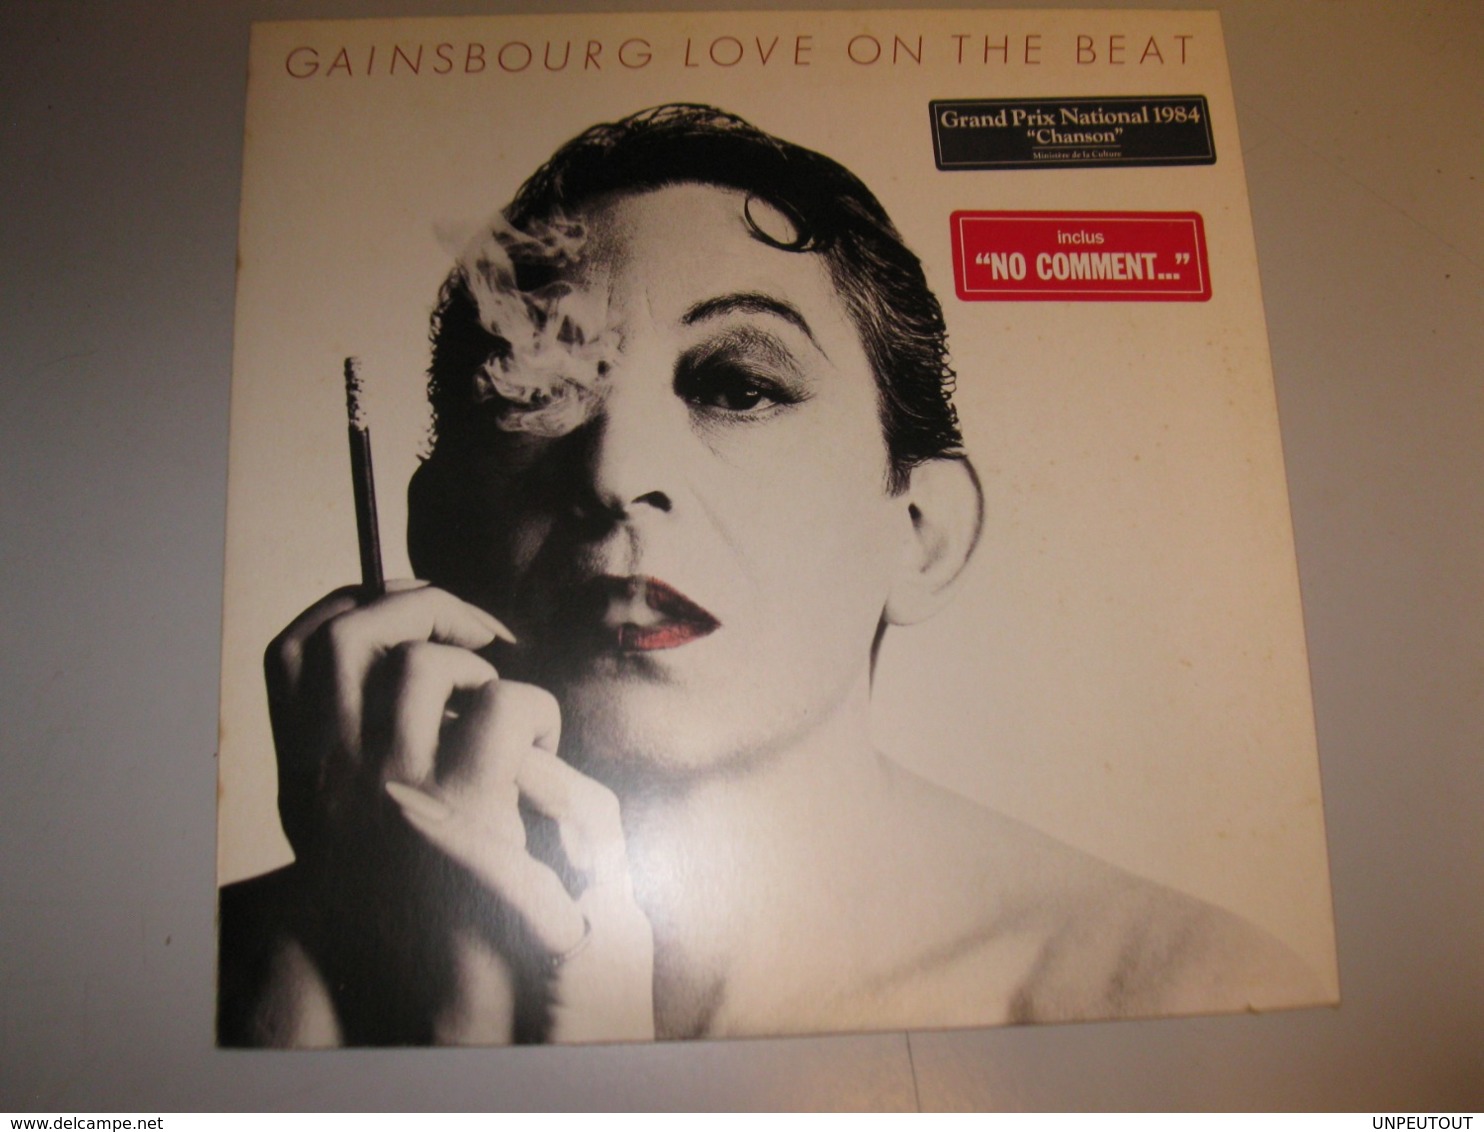 VINYLE "GAINSBOURG  LOVE ON THE BEAT" 33 T PHILIPS / PHONOGRAM 1984 - Other - French Music